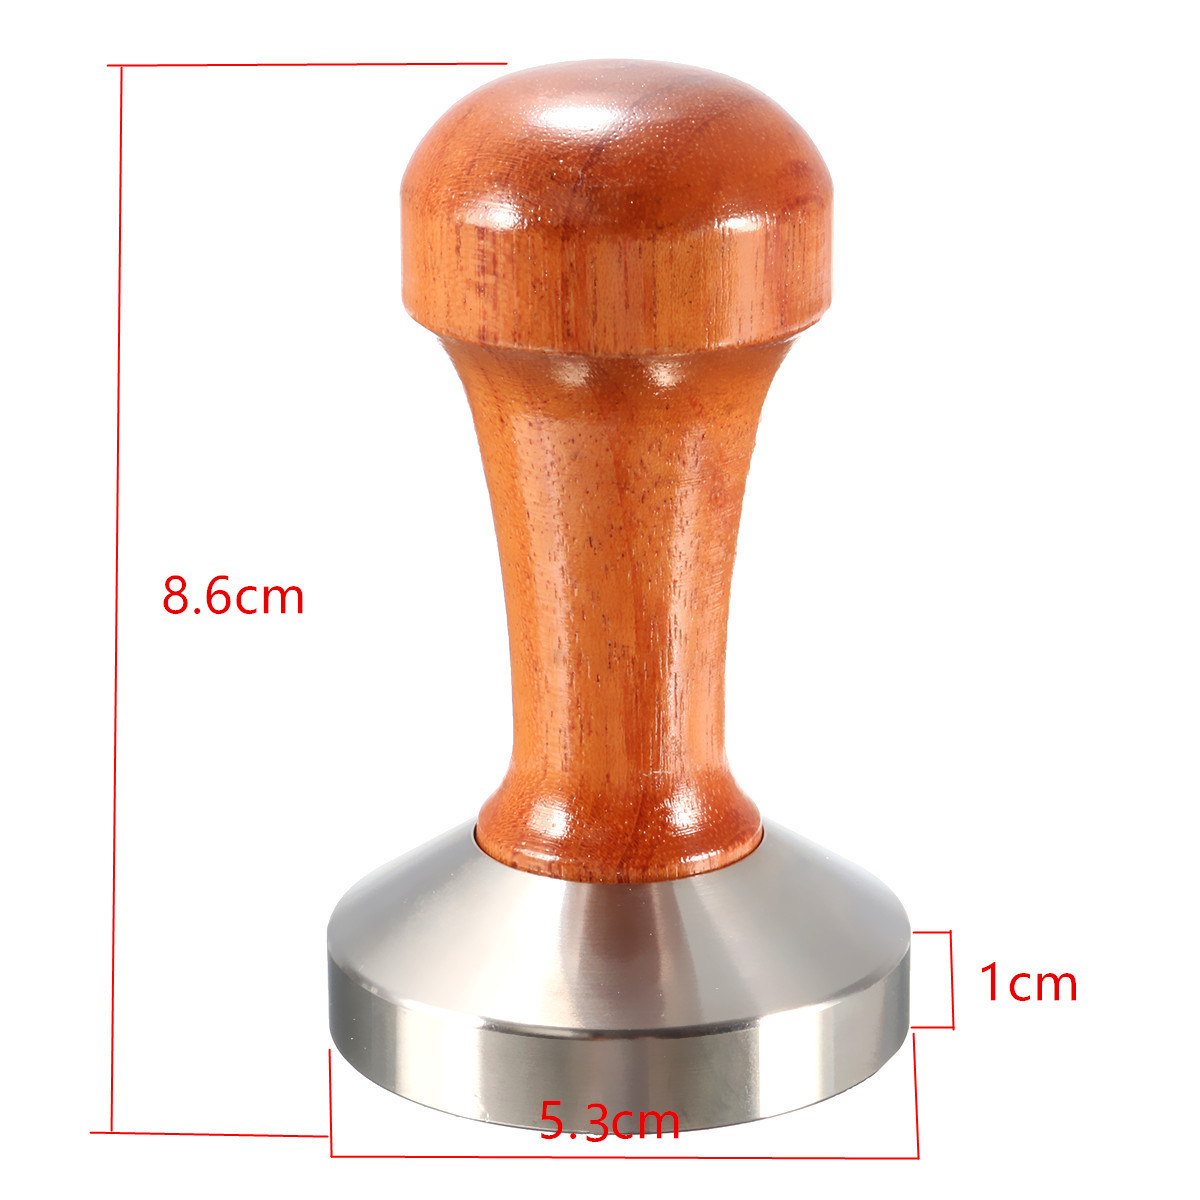 53mm-Stainless-Steel-Cafe-Coffee-Tamper-Bean-Press-for-Espresso-Flat-Base-Wooden-Handle-1170307-3